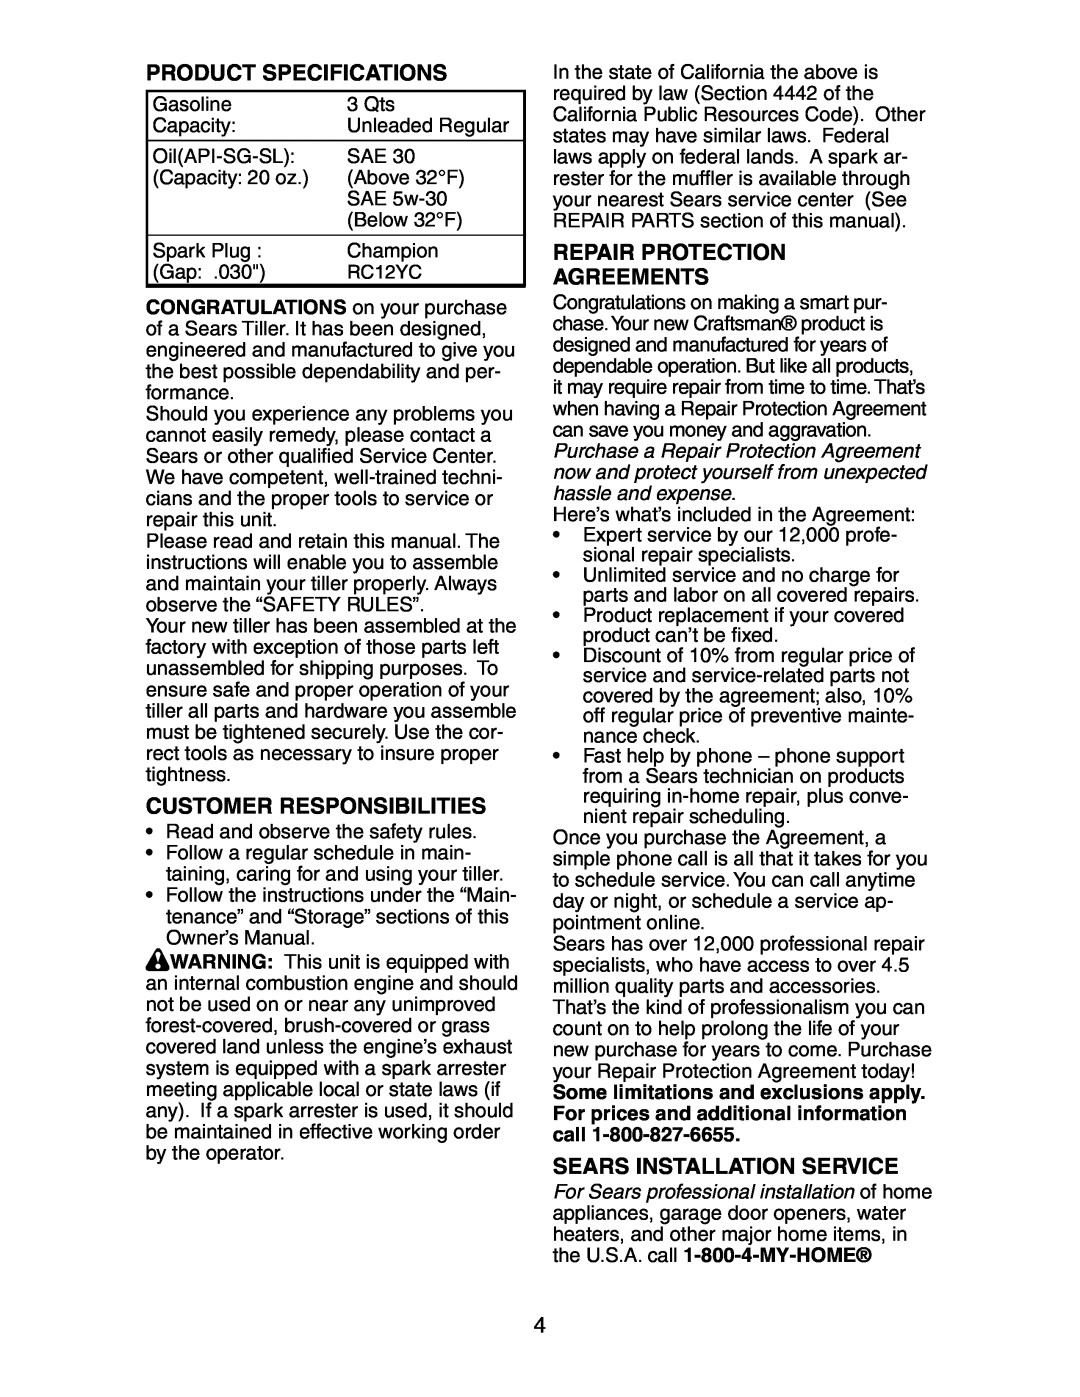 Sears 917.29149 owner manual Product Specifications, Customer Responsibilities, Repair Protection Agreements 